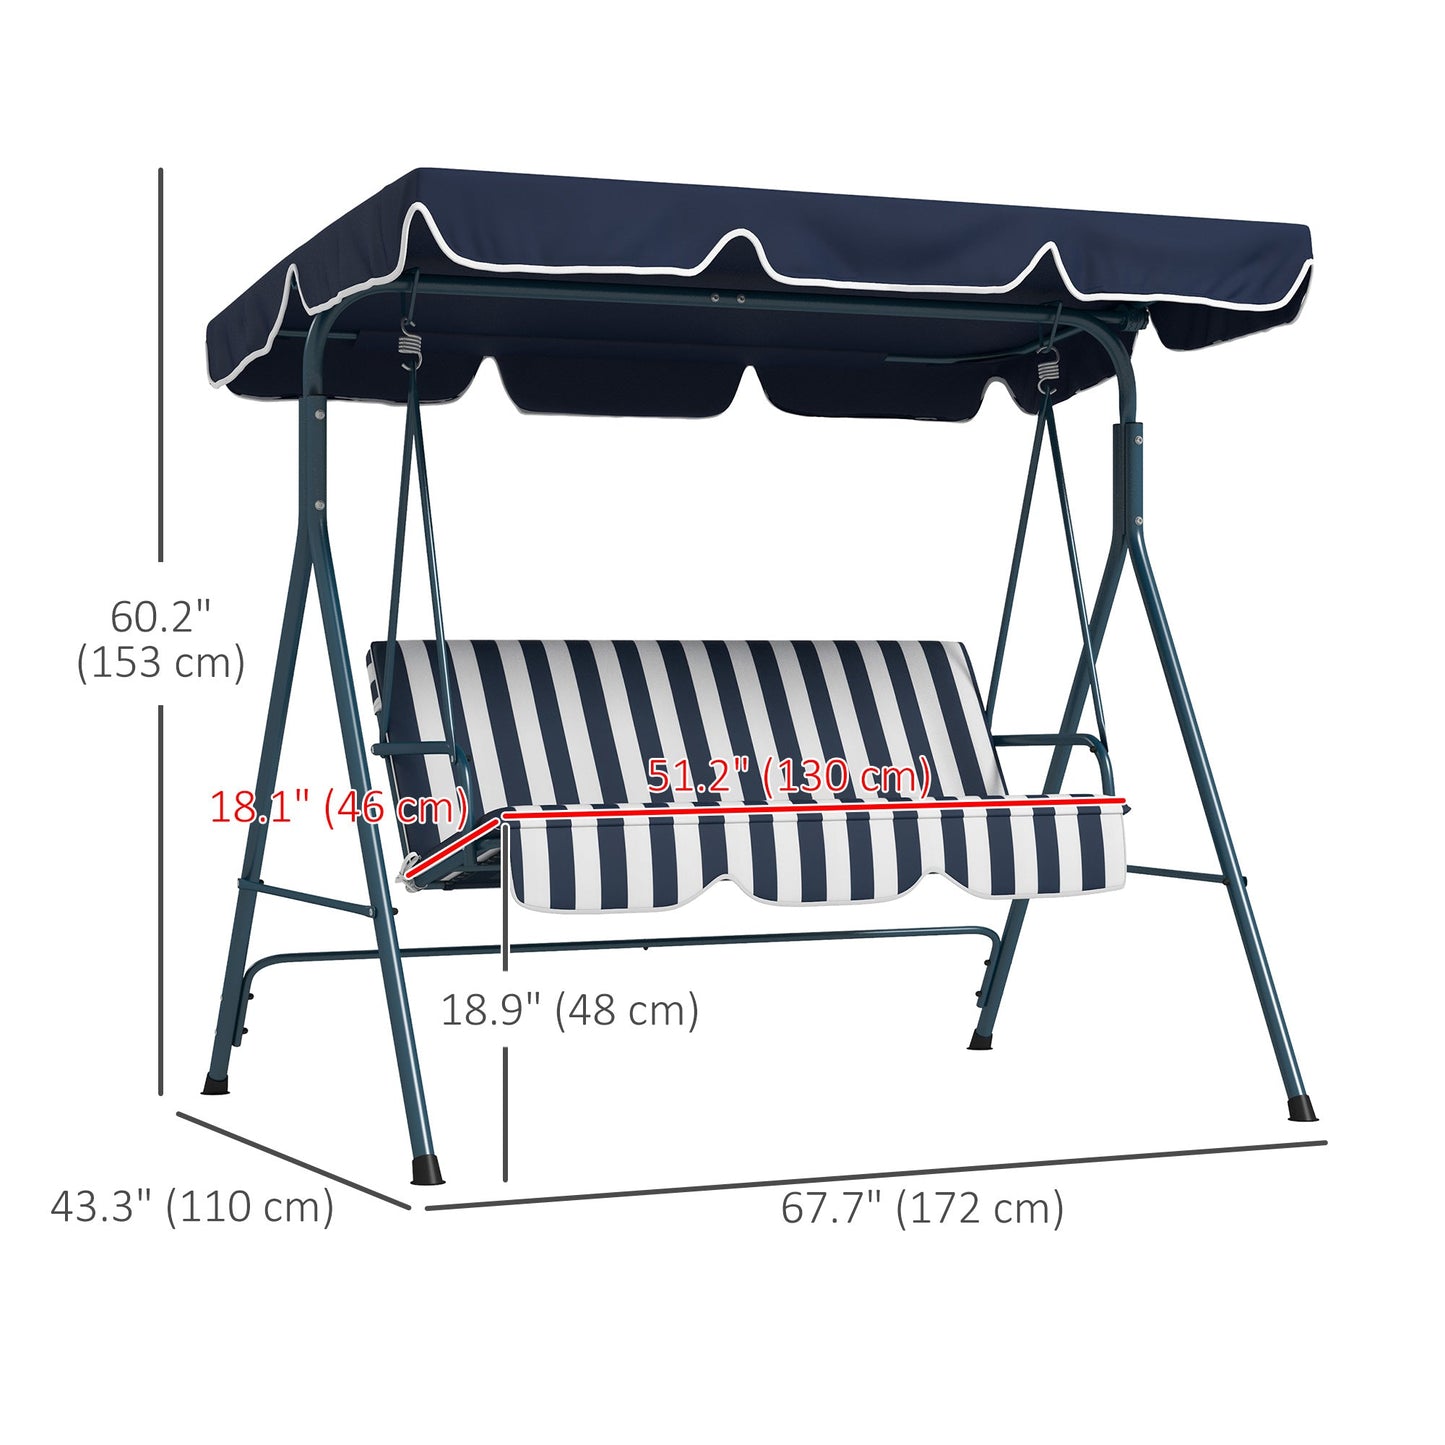 3-Seater Outdoor Porch Swing with Adjustable Canopy, Patio Swing Chair for Garden, Poolside, Backyard, Blue and White - Gallery Canada